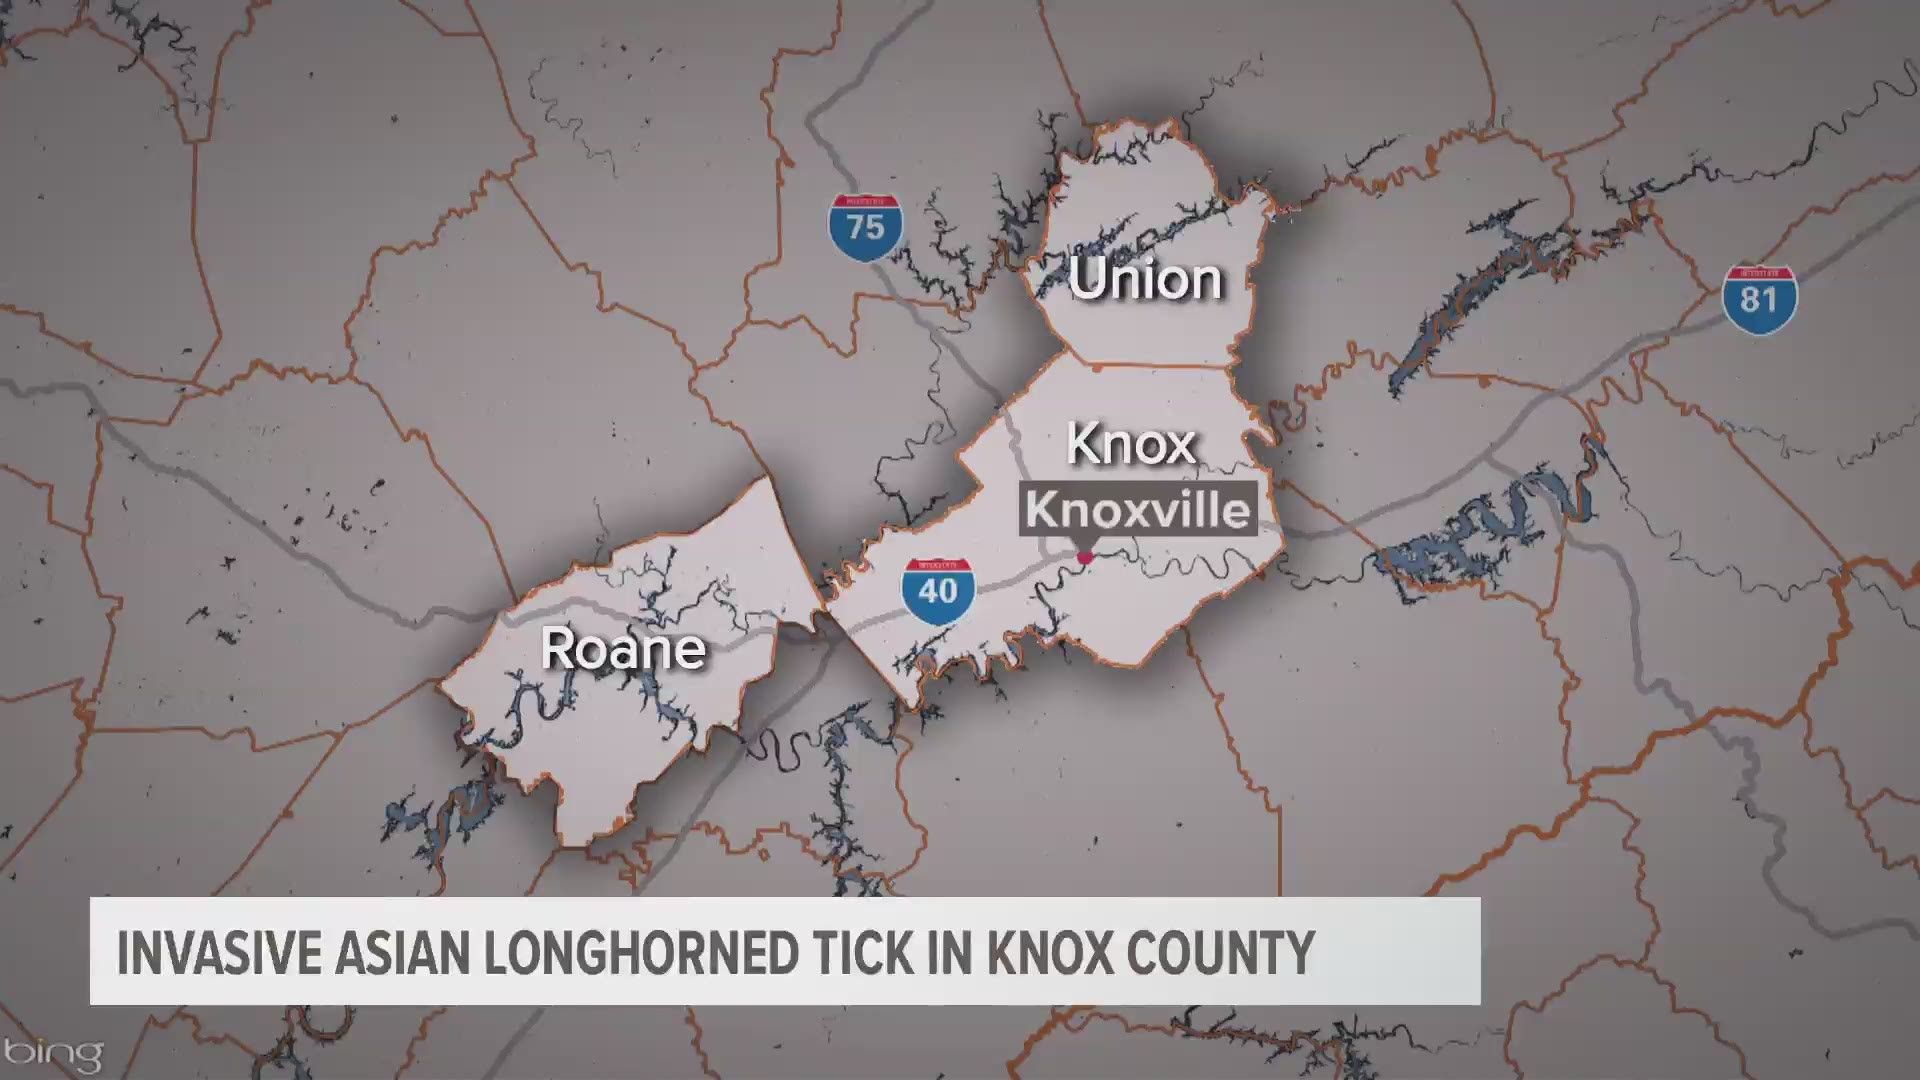 Scientists with the University of Tennessee have collected the Asian longhorned tick in Knox County.